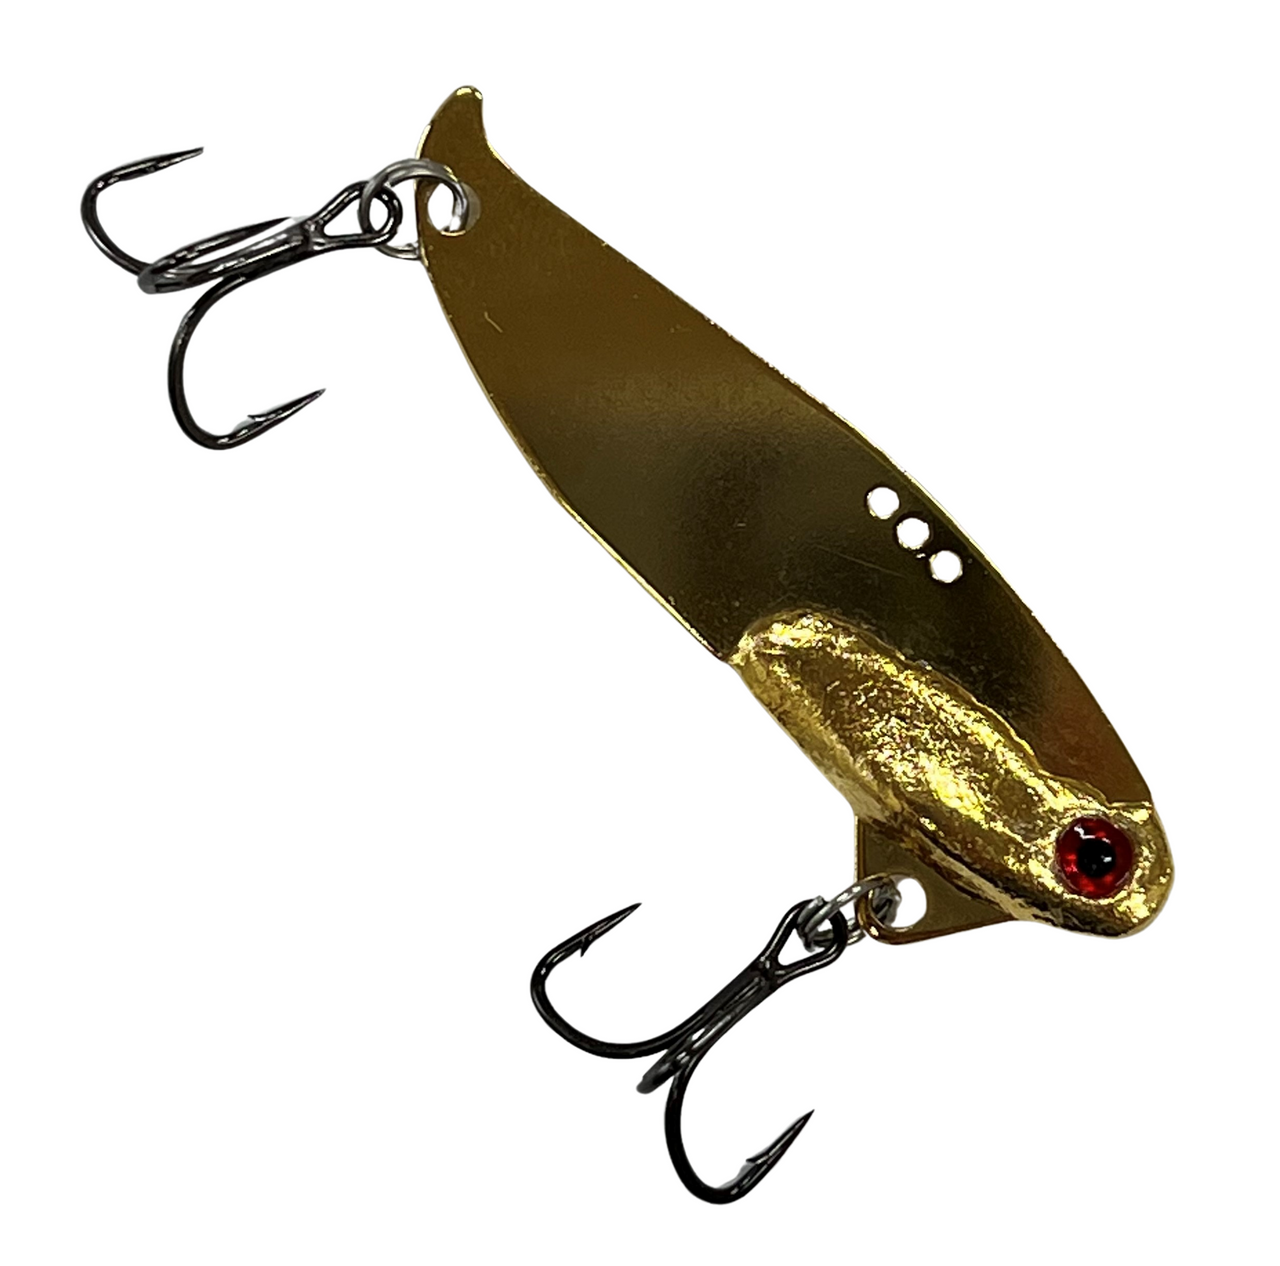 Hook Up Baits Handcrafted Soft Fishing Jigs (Color: Black Gold / 8